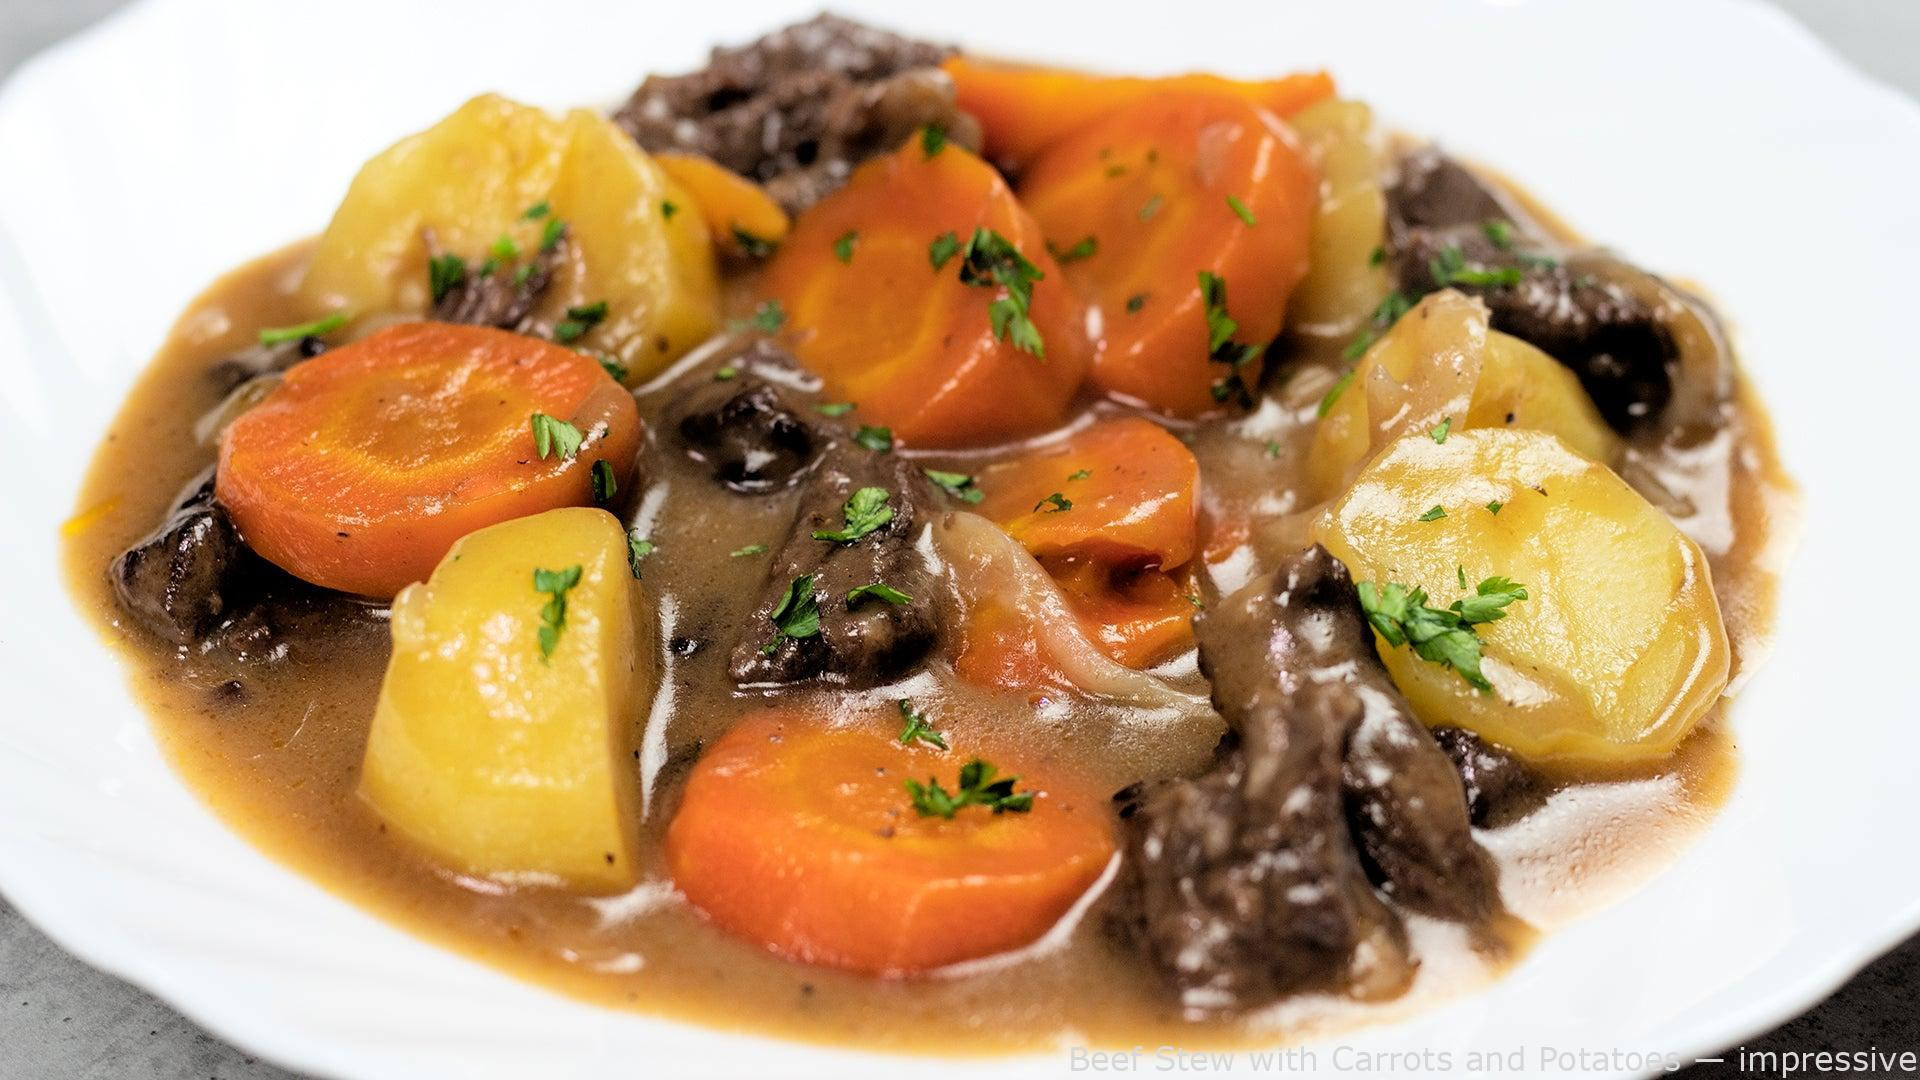 Beef Stew With Carrots And Potatoes
 Beef Stew with Carrots and Potatoes — impressive